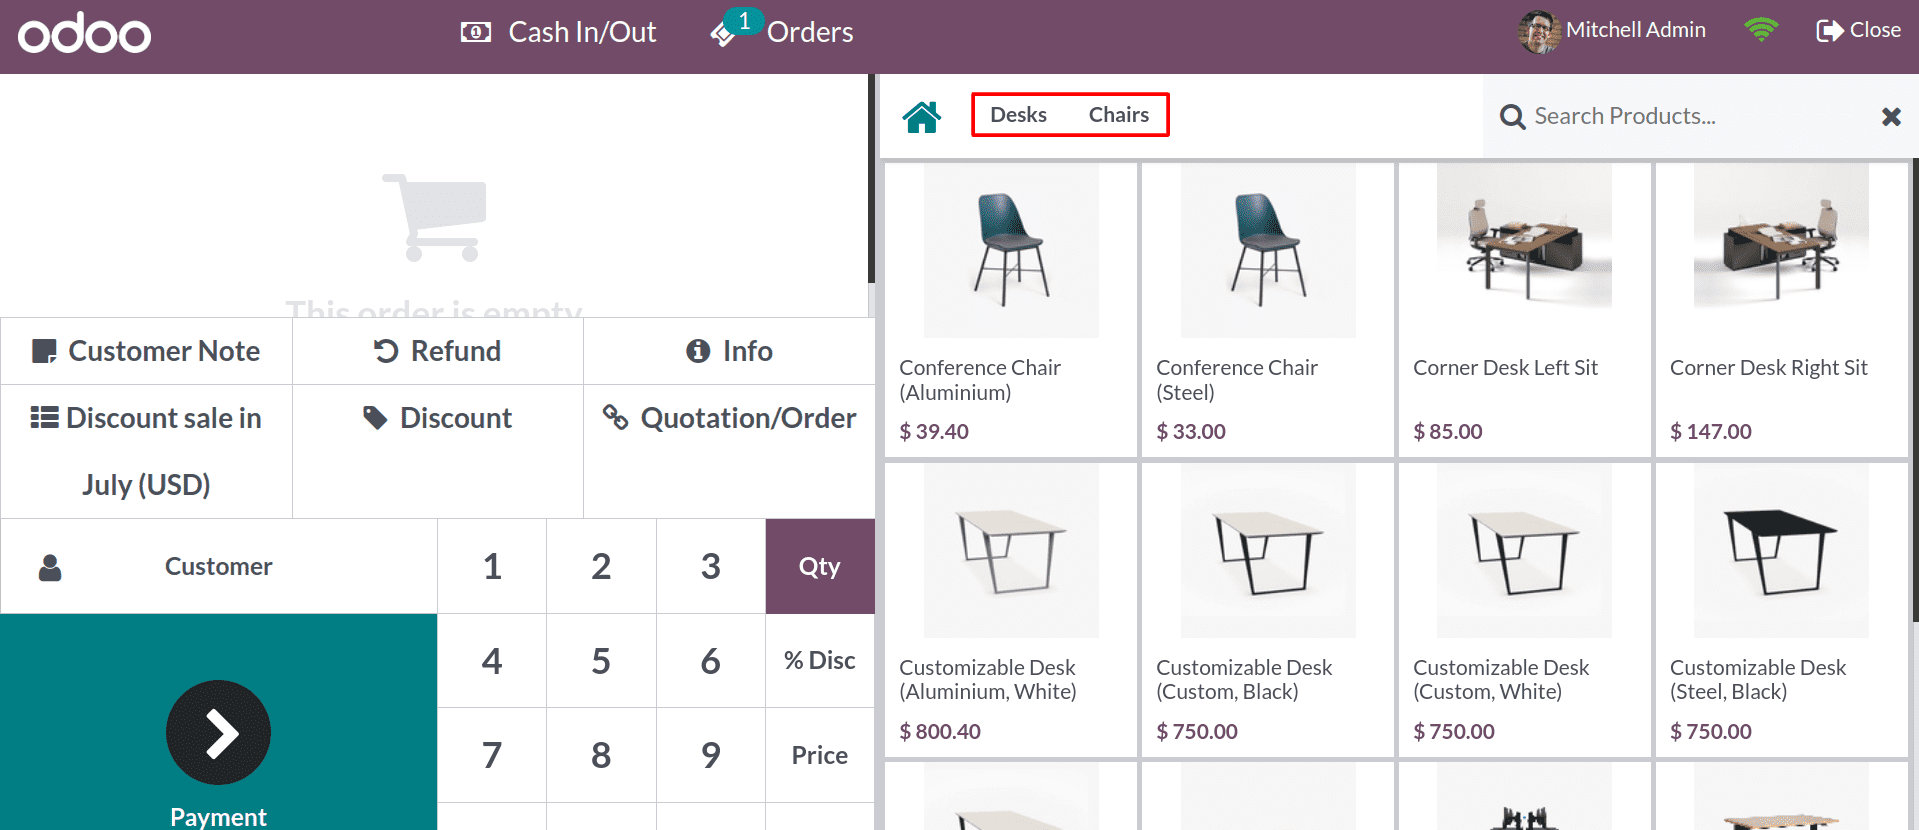 how-to-manage-product-category-in-odoo-16-pos-12-cybrosys